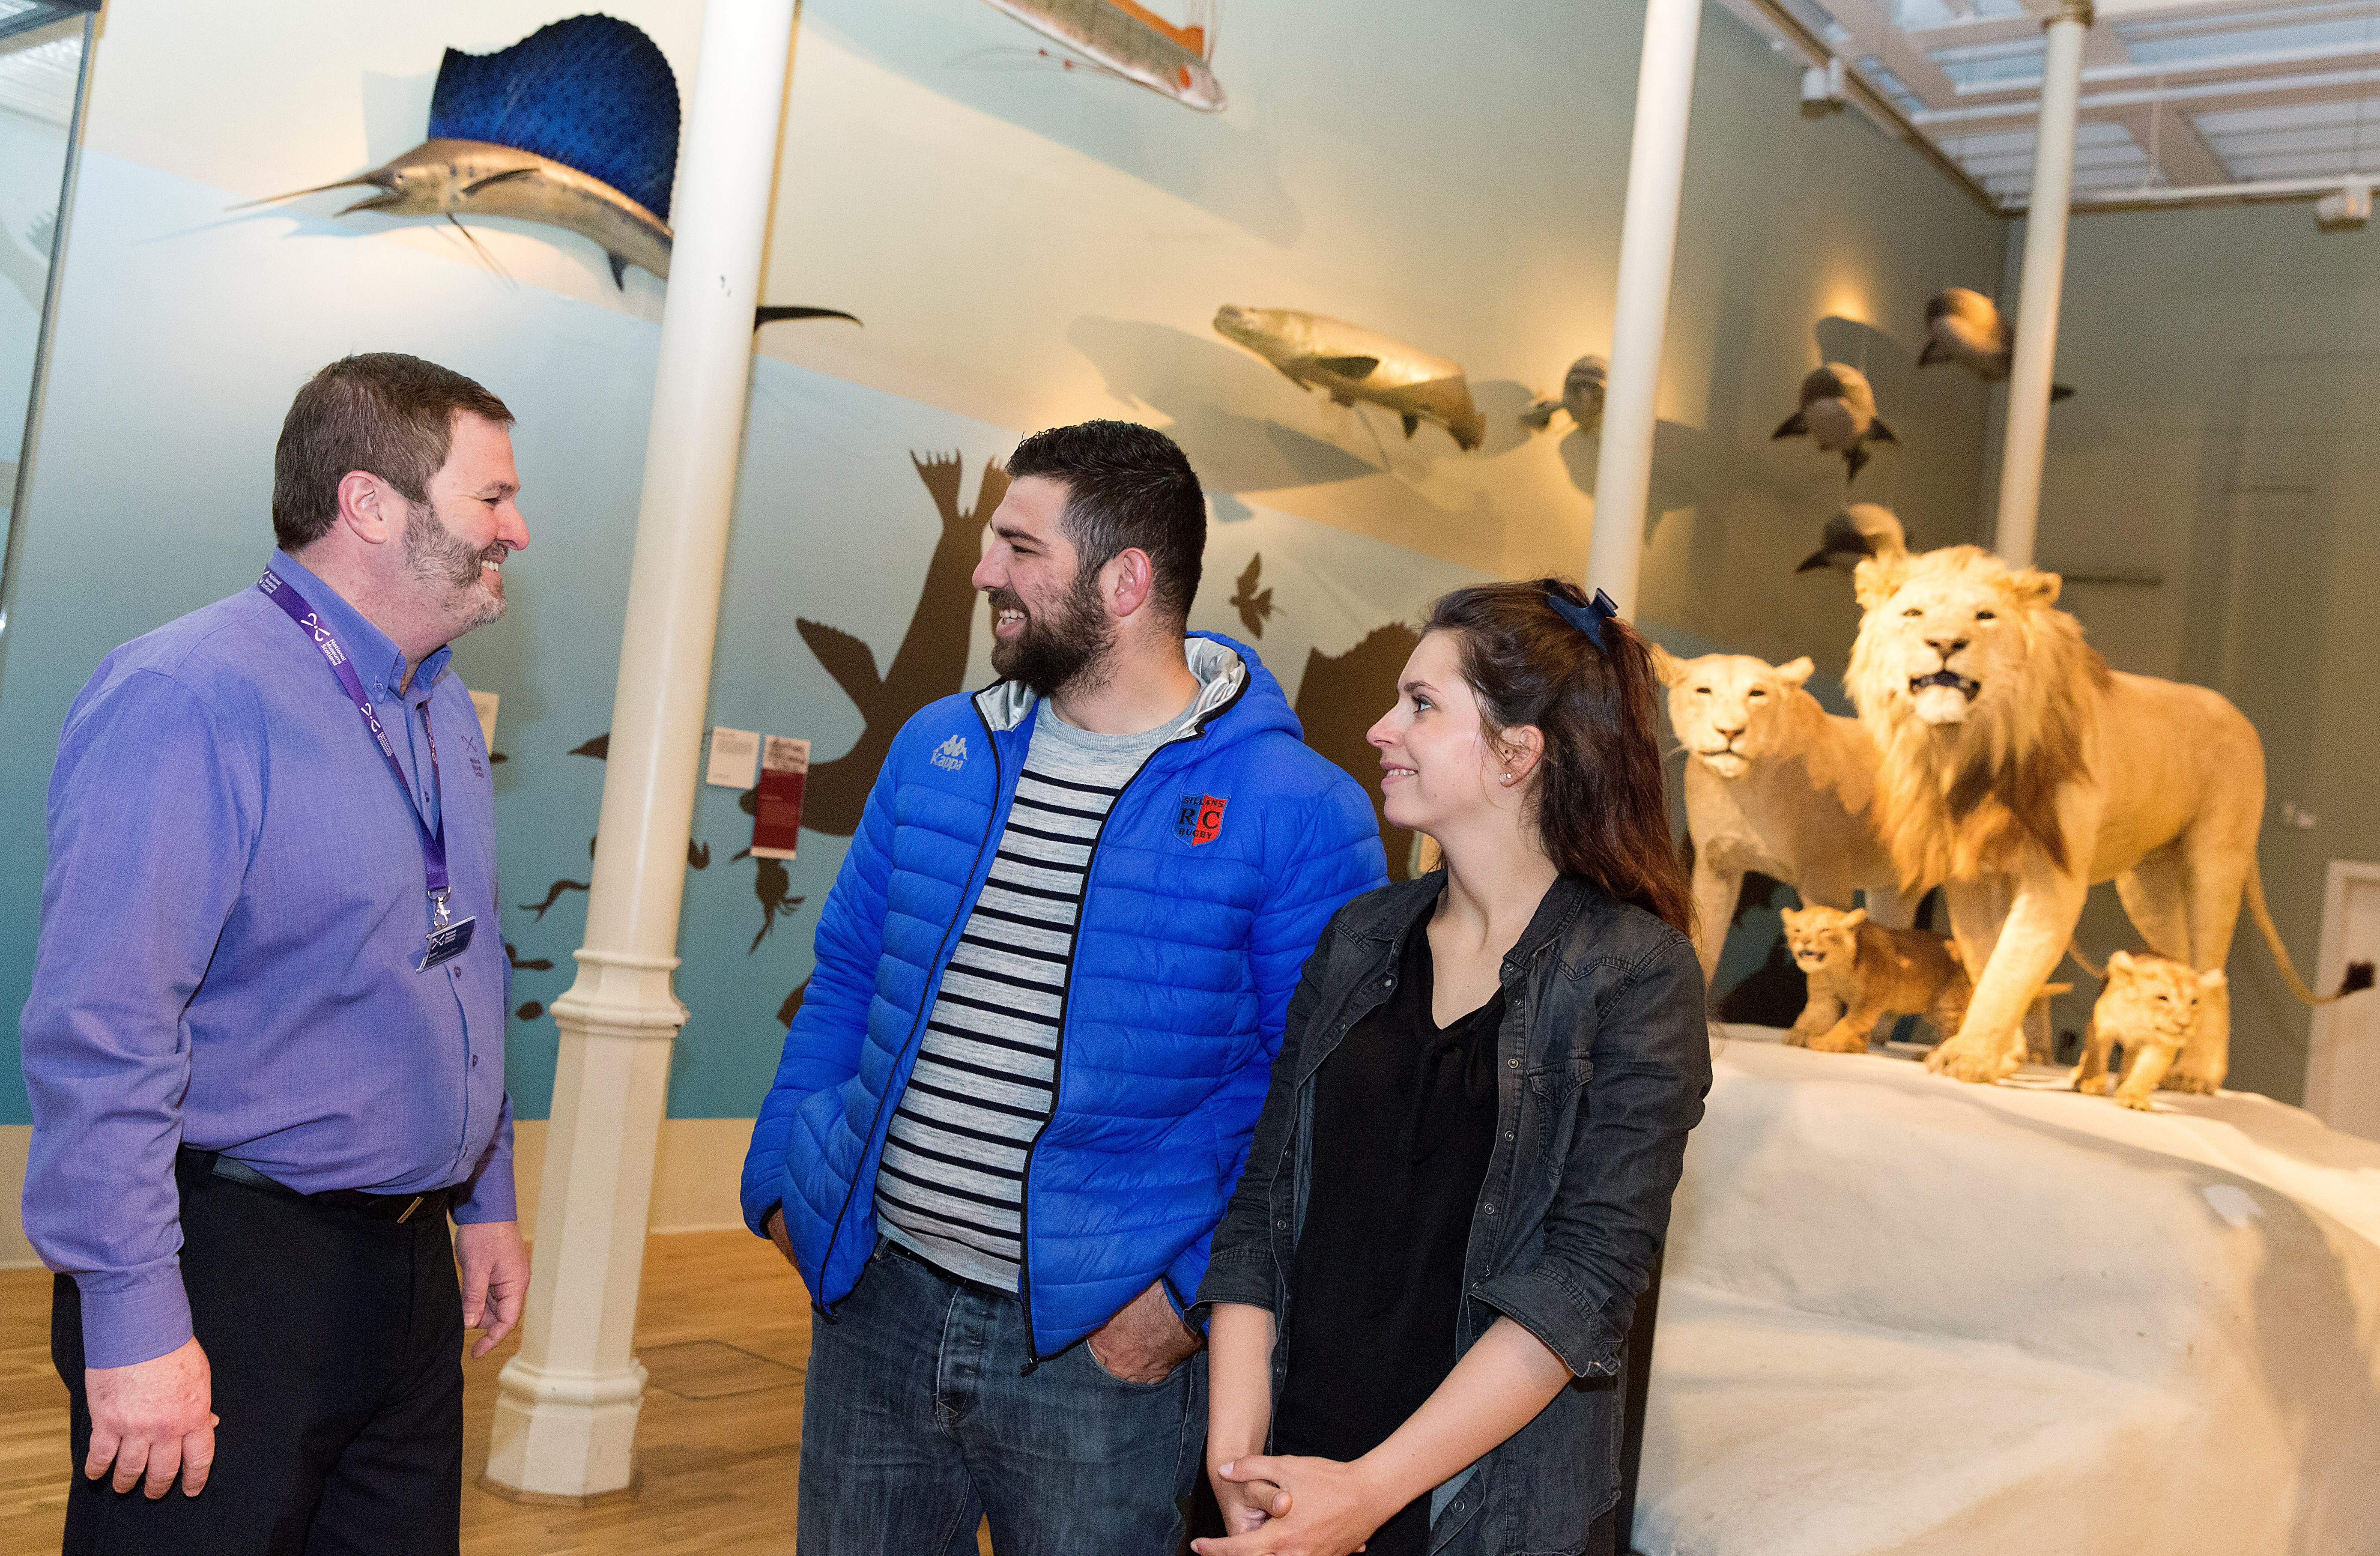 A member of our visitor services team chats with two visitors in the Animal World gallery.